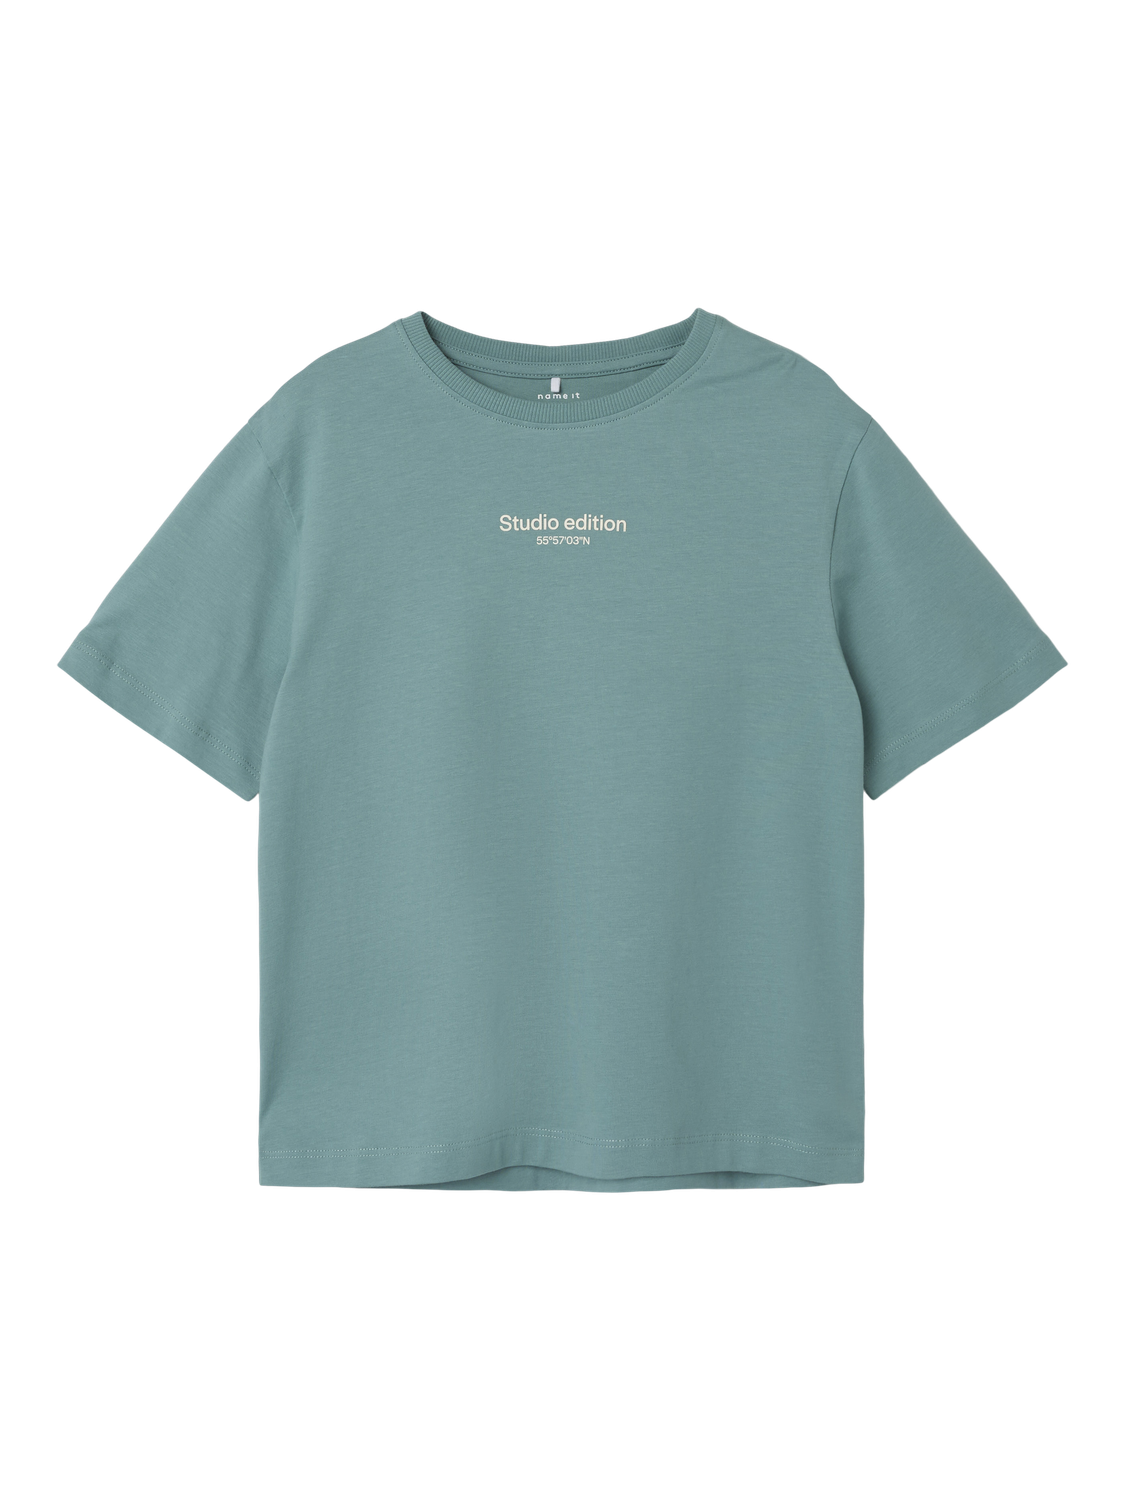 NKMBRODY T-Shirts & Tops - Mineral Blue